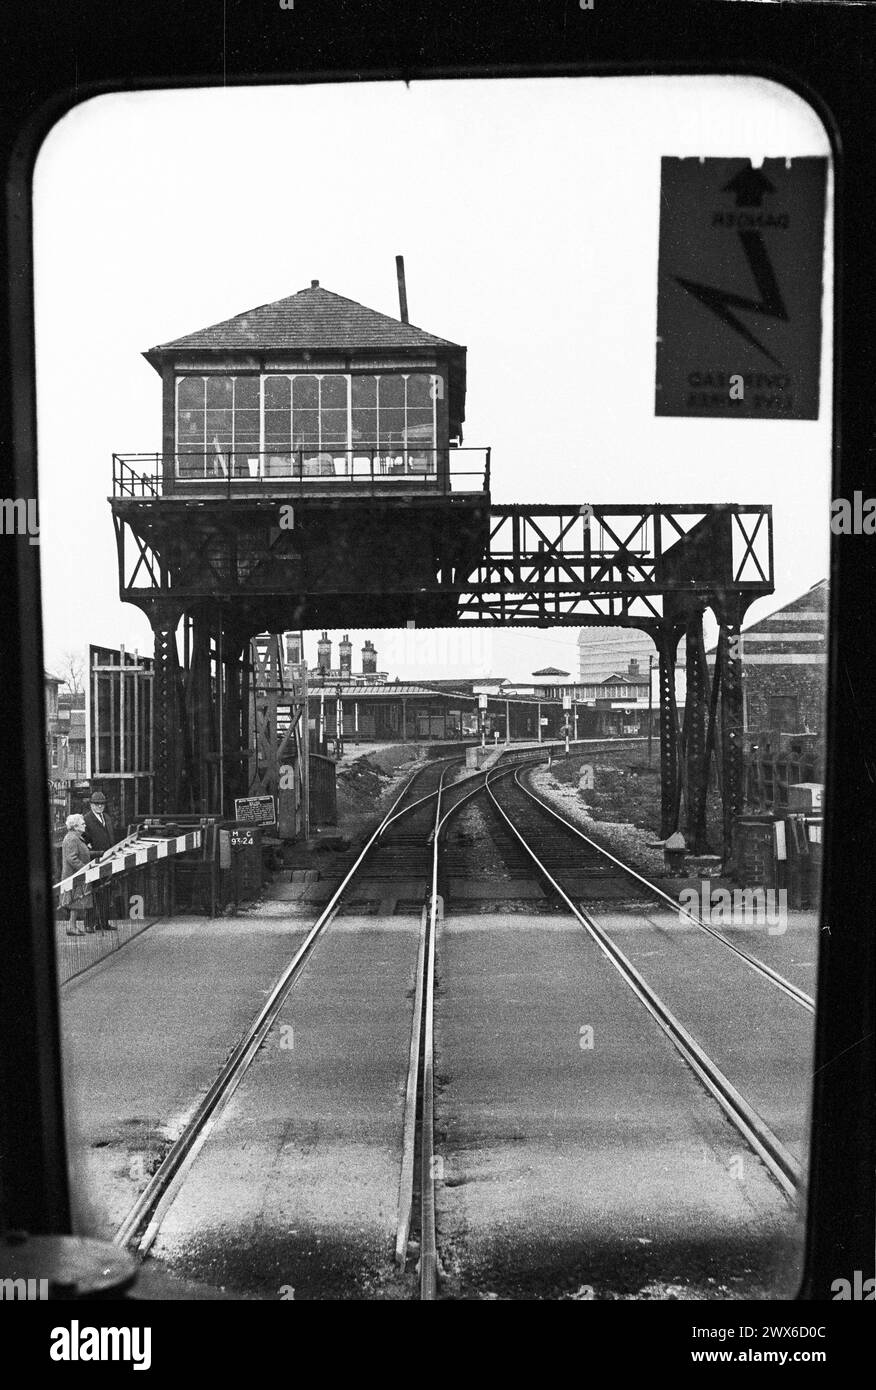 Gloucester, England: the former gantry-mounted Barton Street signal box, with Eastgate Station seen beyond, March 1974. Both signal box and station are now demolished. Viewed from the front of a passenger train. Stock Photo